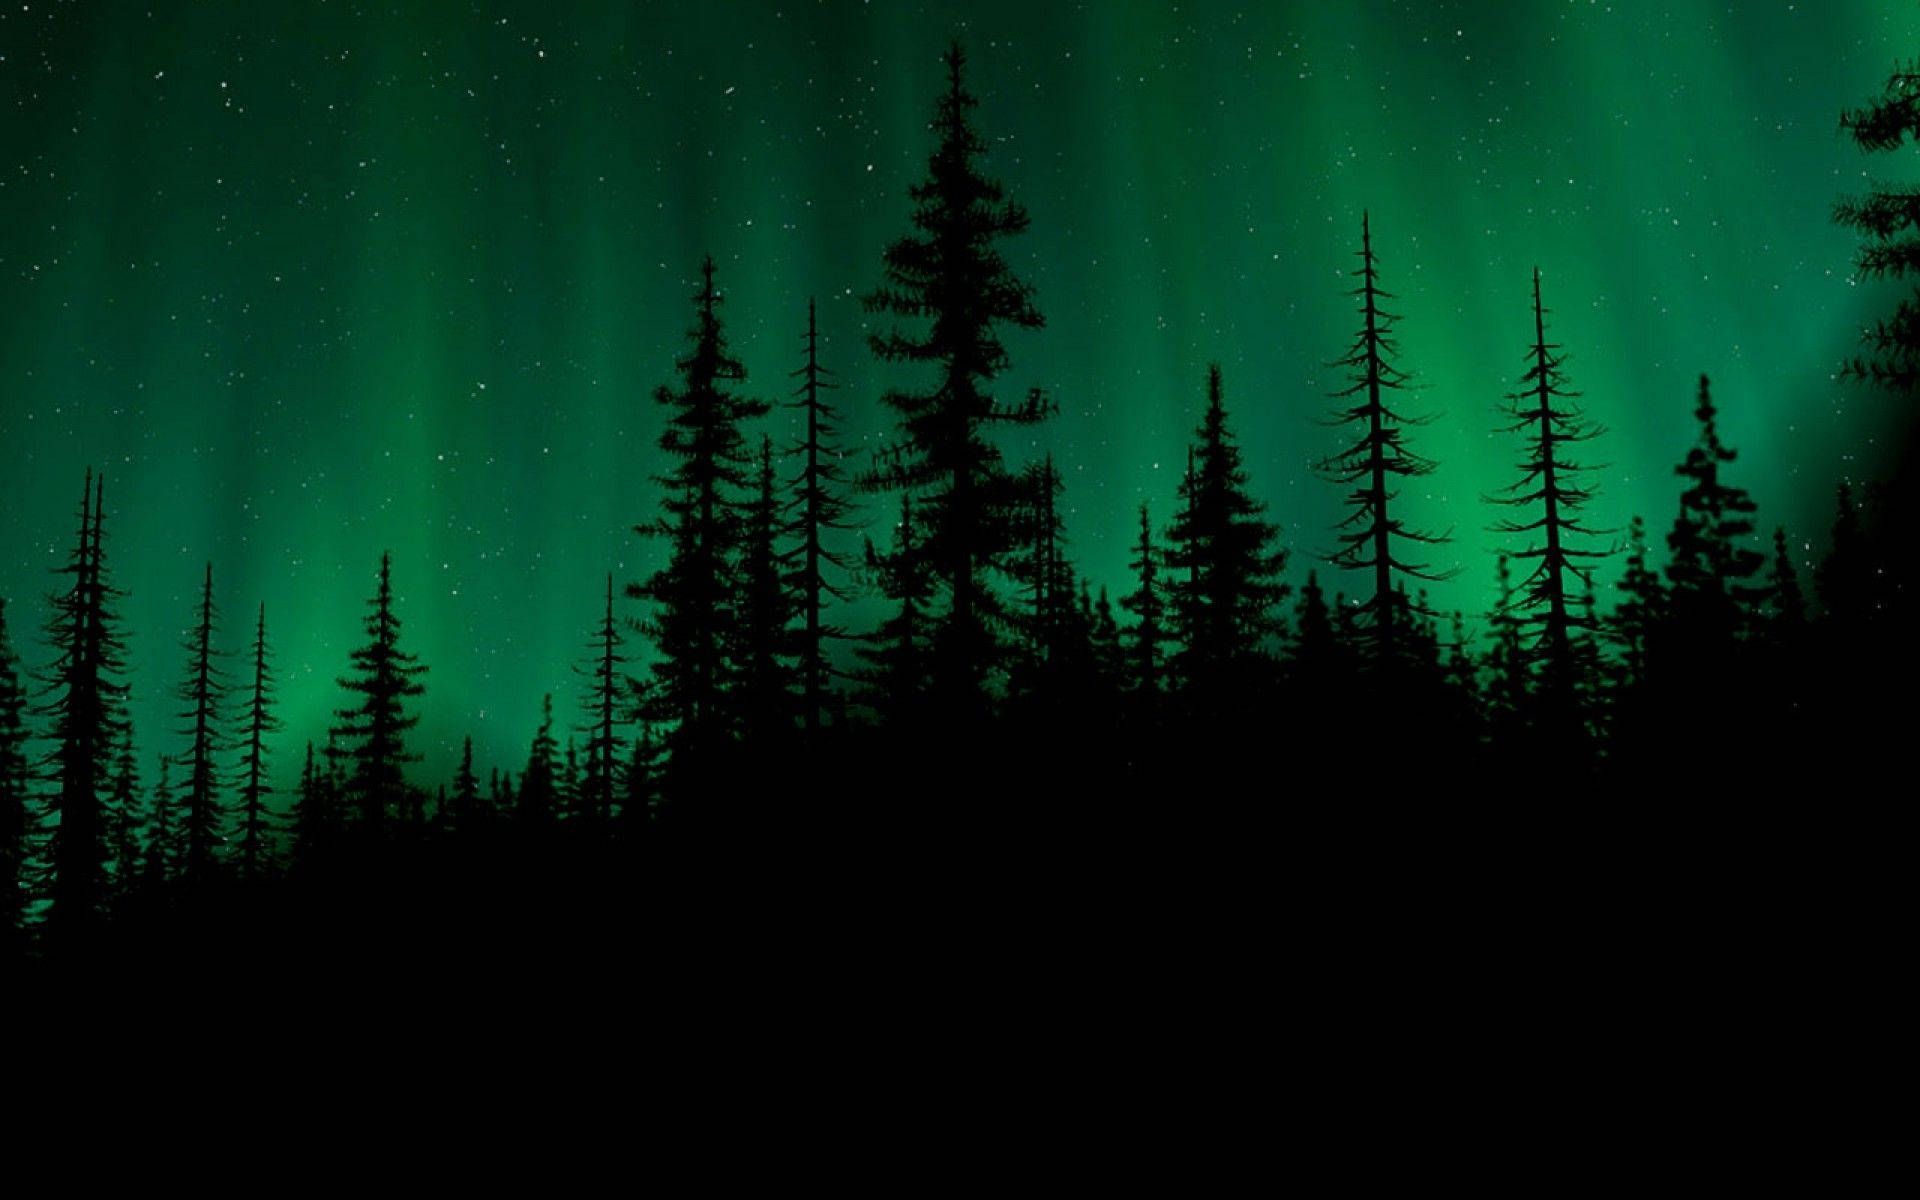 The aurora borealis is shown over a forest of trees - Dark green